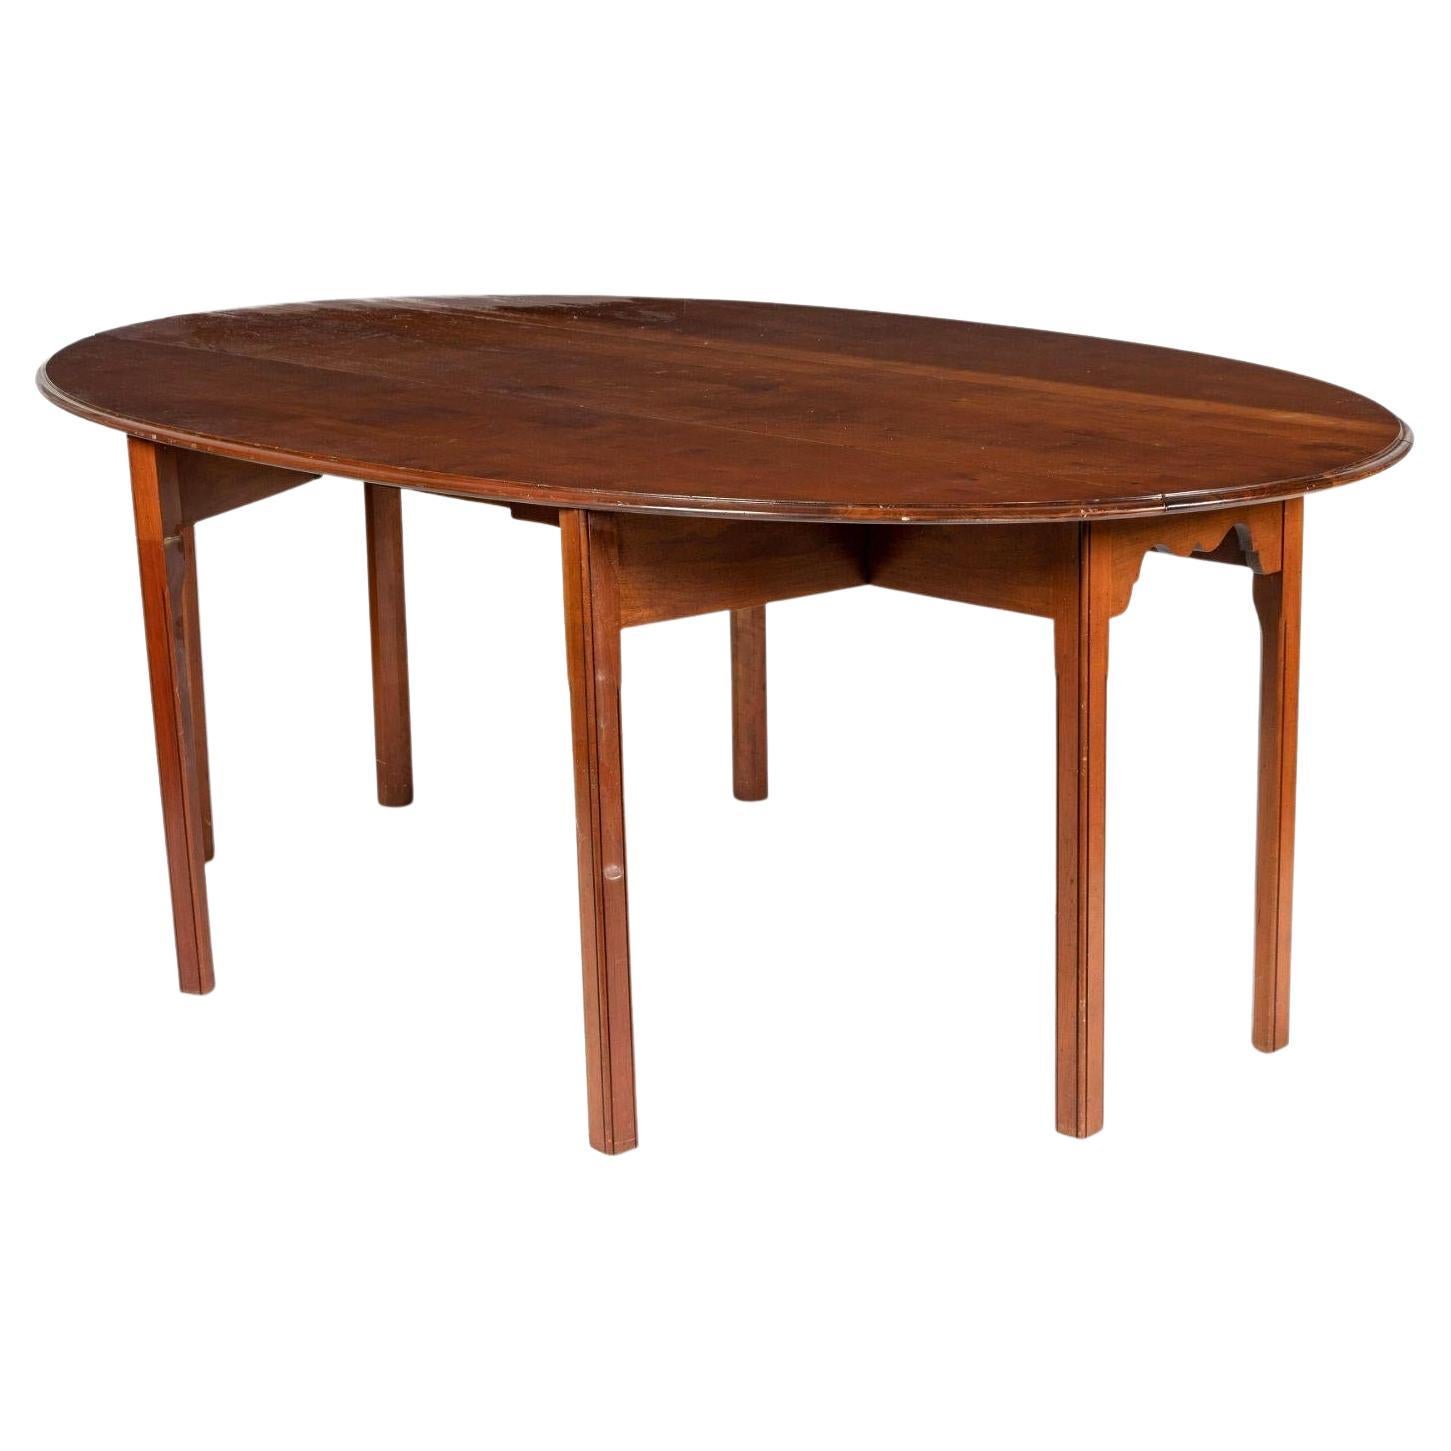 Antique English George III Style Mahogany Wake Drop Leaf Table from early 20th century.

Dimensions
29 1/2